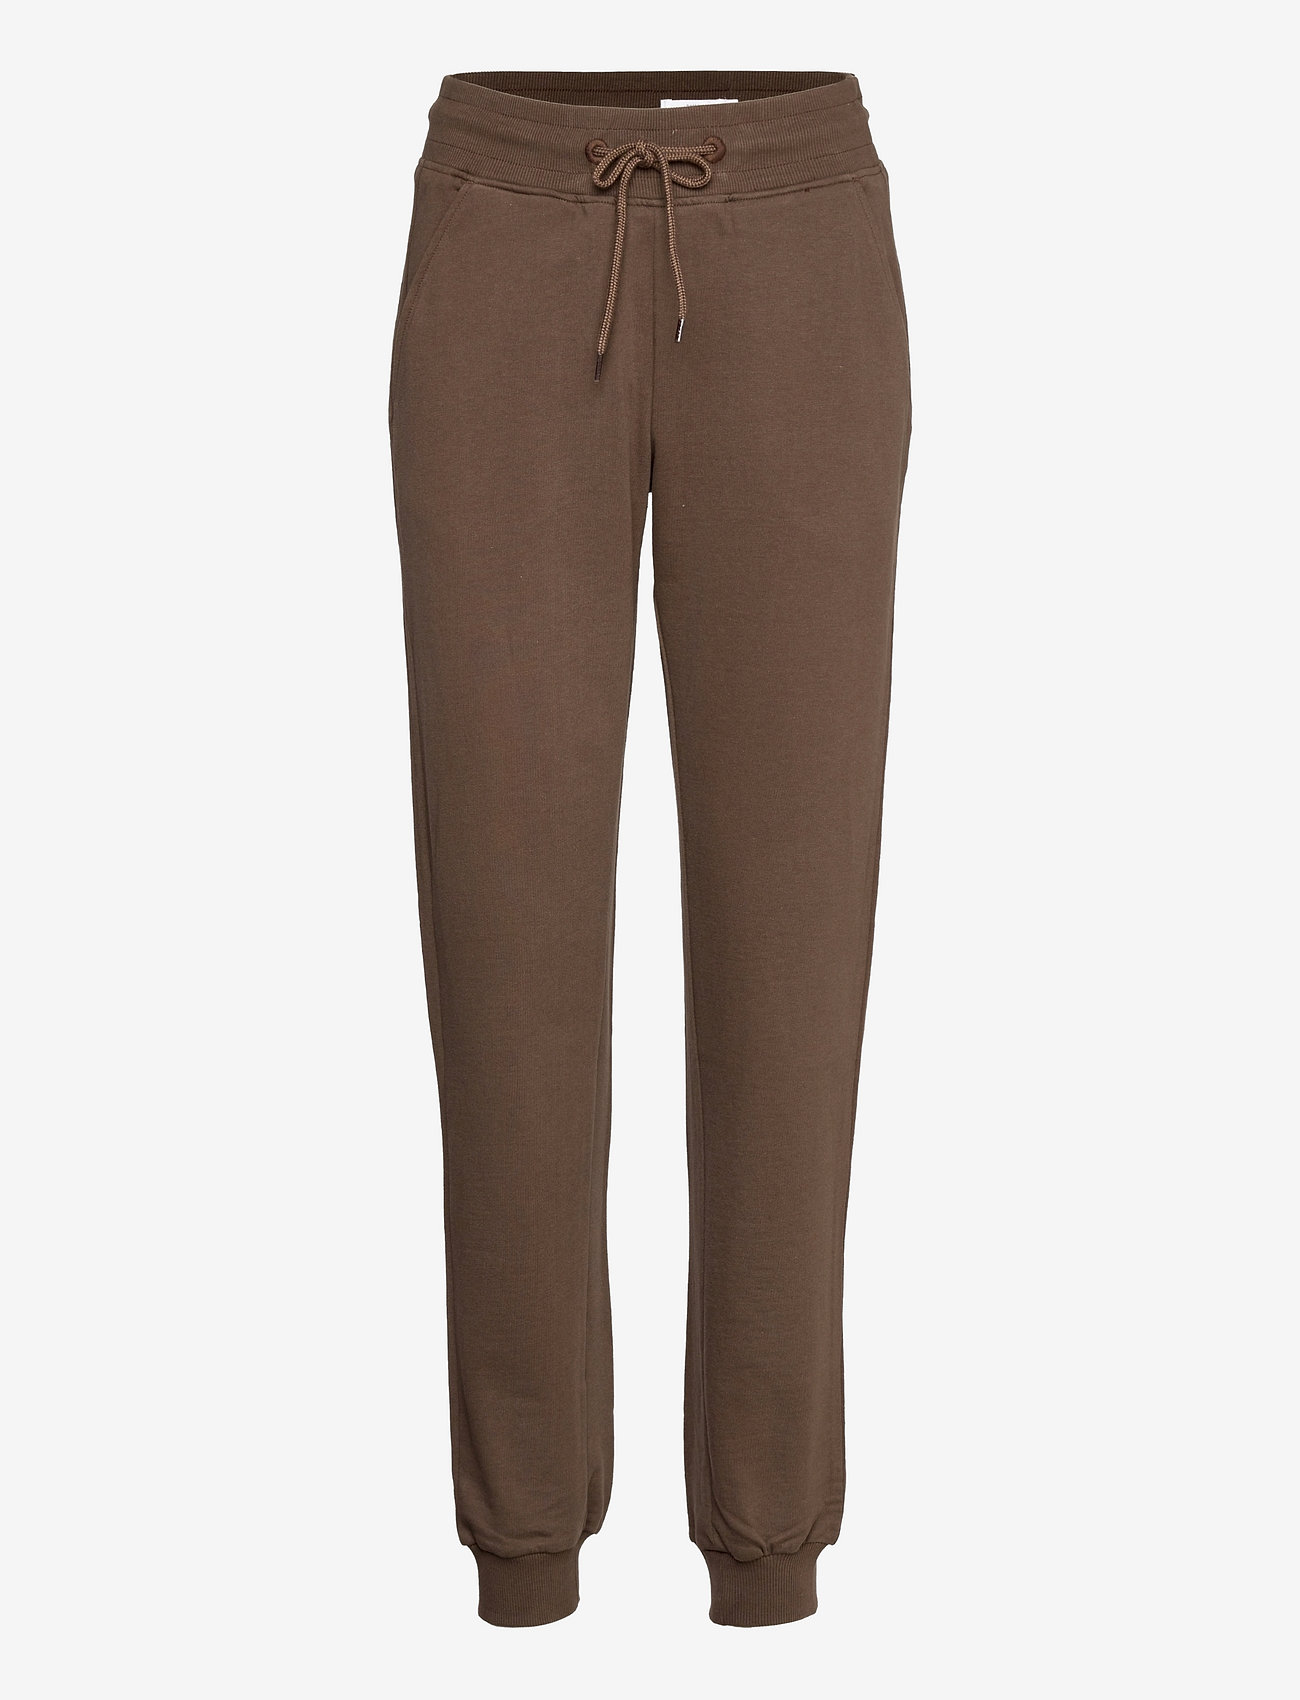 Bread & Boxers - Lounge pant - pysjbukser - earth brown - 0